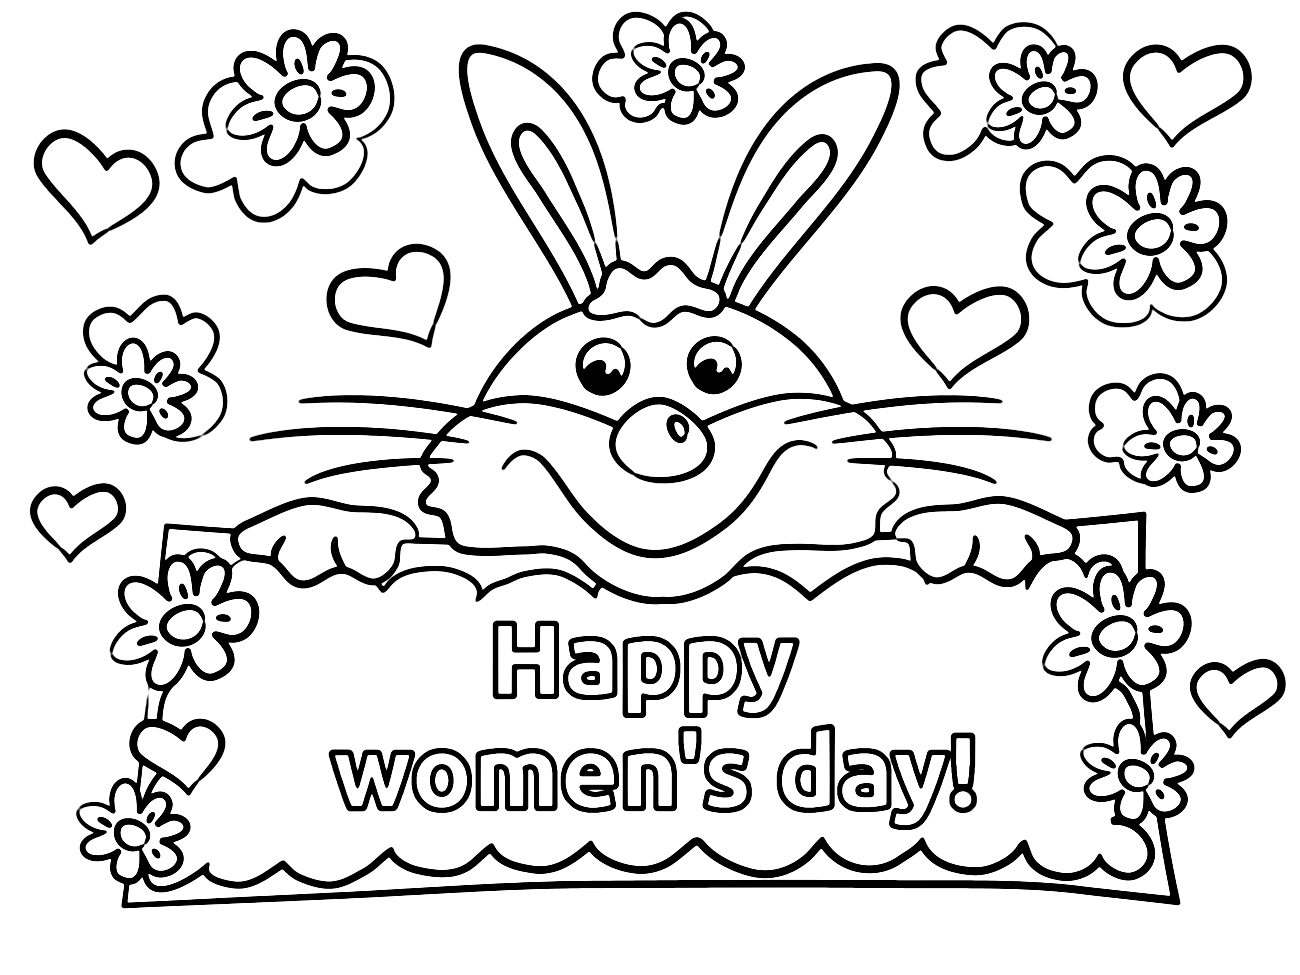 Bunny card of Womens Day from Bunny